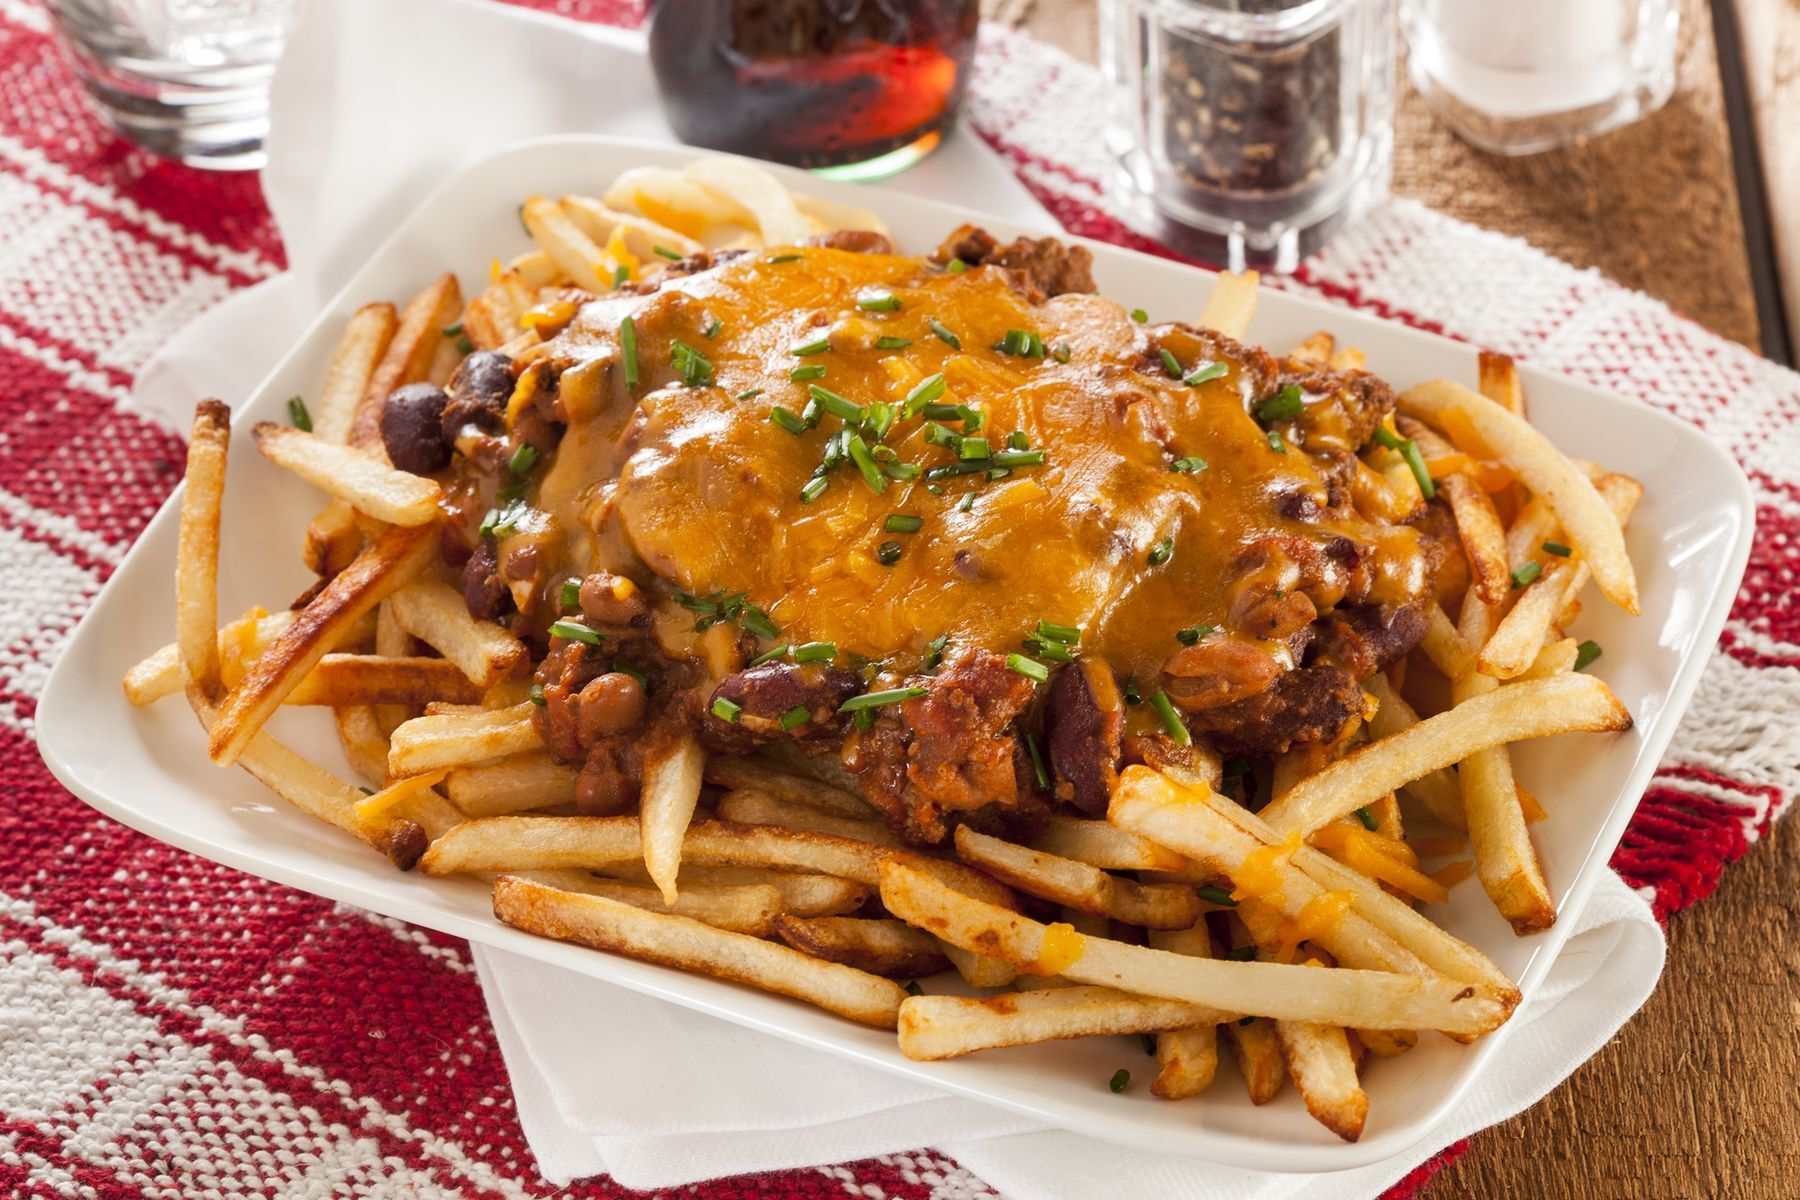 <p>Check out the <a href="https://www.foodnetwork.com/recipes/sandra-lee/chili-fries-recipe-1947622">American version of Quebec’s poutine</a>. Top fresh fries with a good portion of chili con carne (or vegetarian), then cover with cheddar cheese (grated or as a sauce). Everyone loves chili fries!</p>